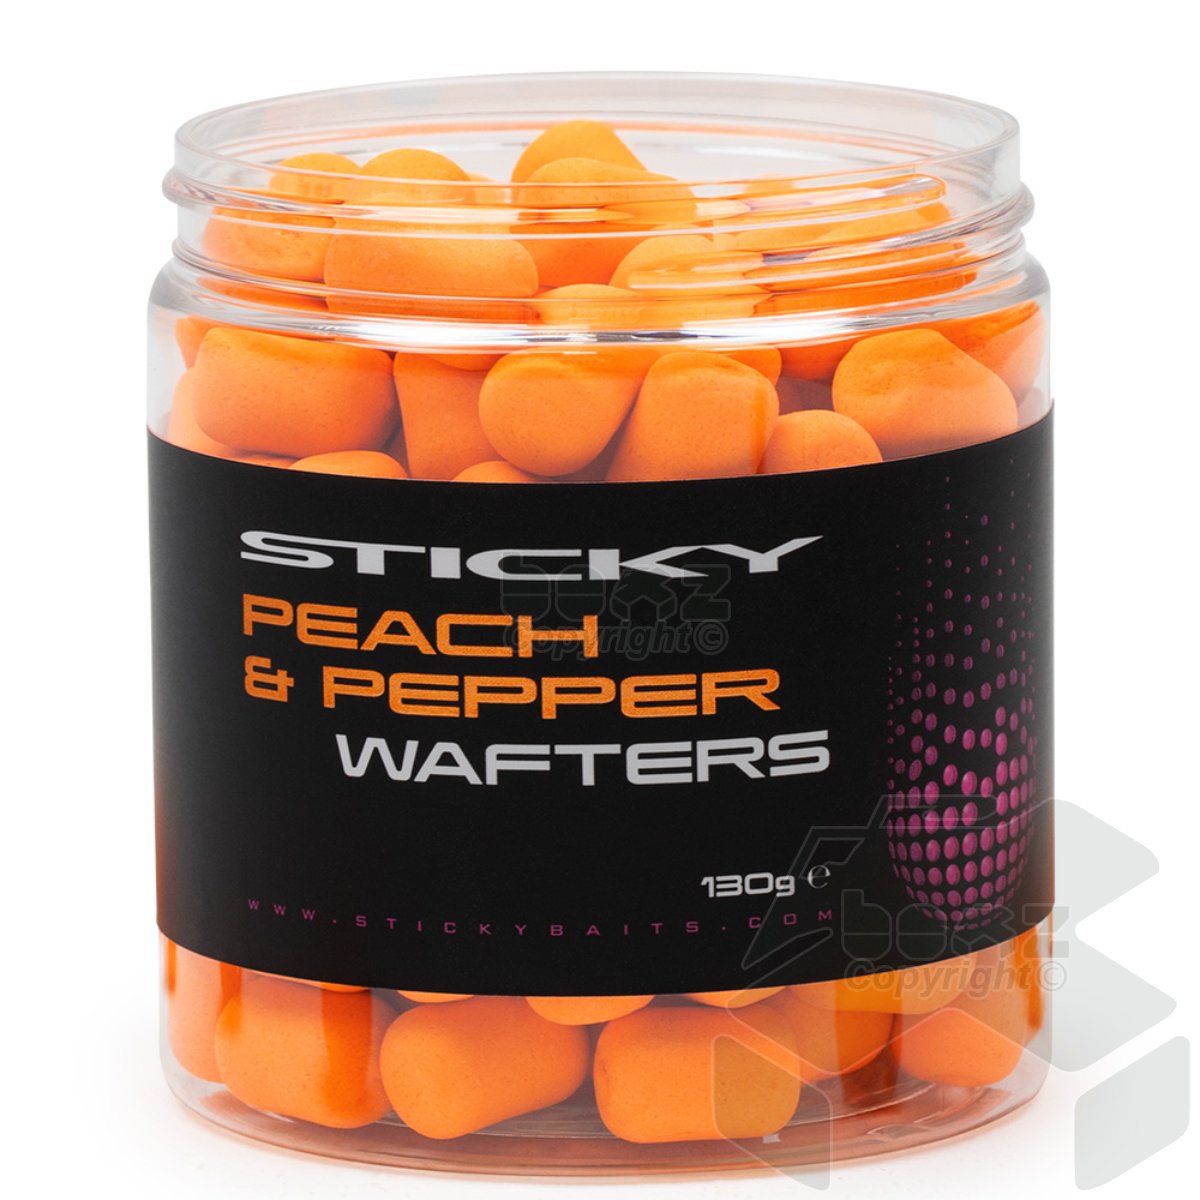 Sticky Peach & Pepper Wafters 130g Pot